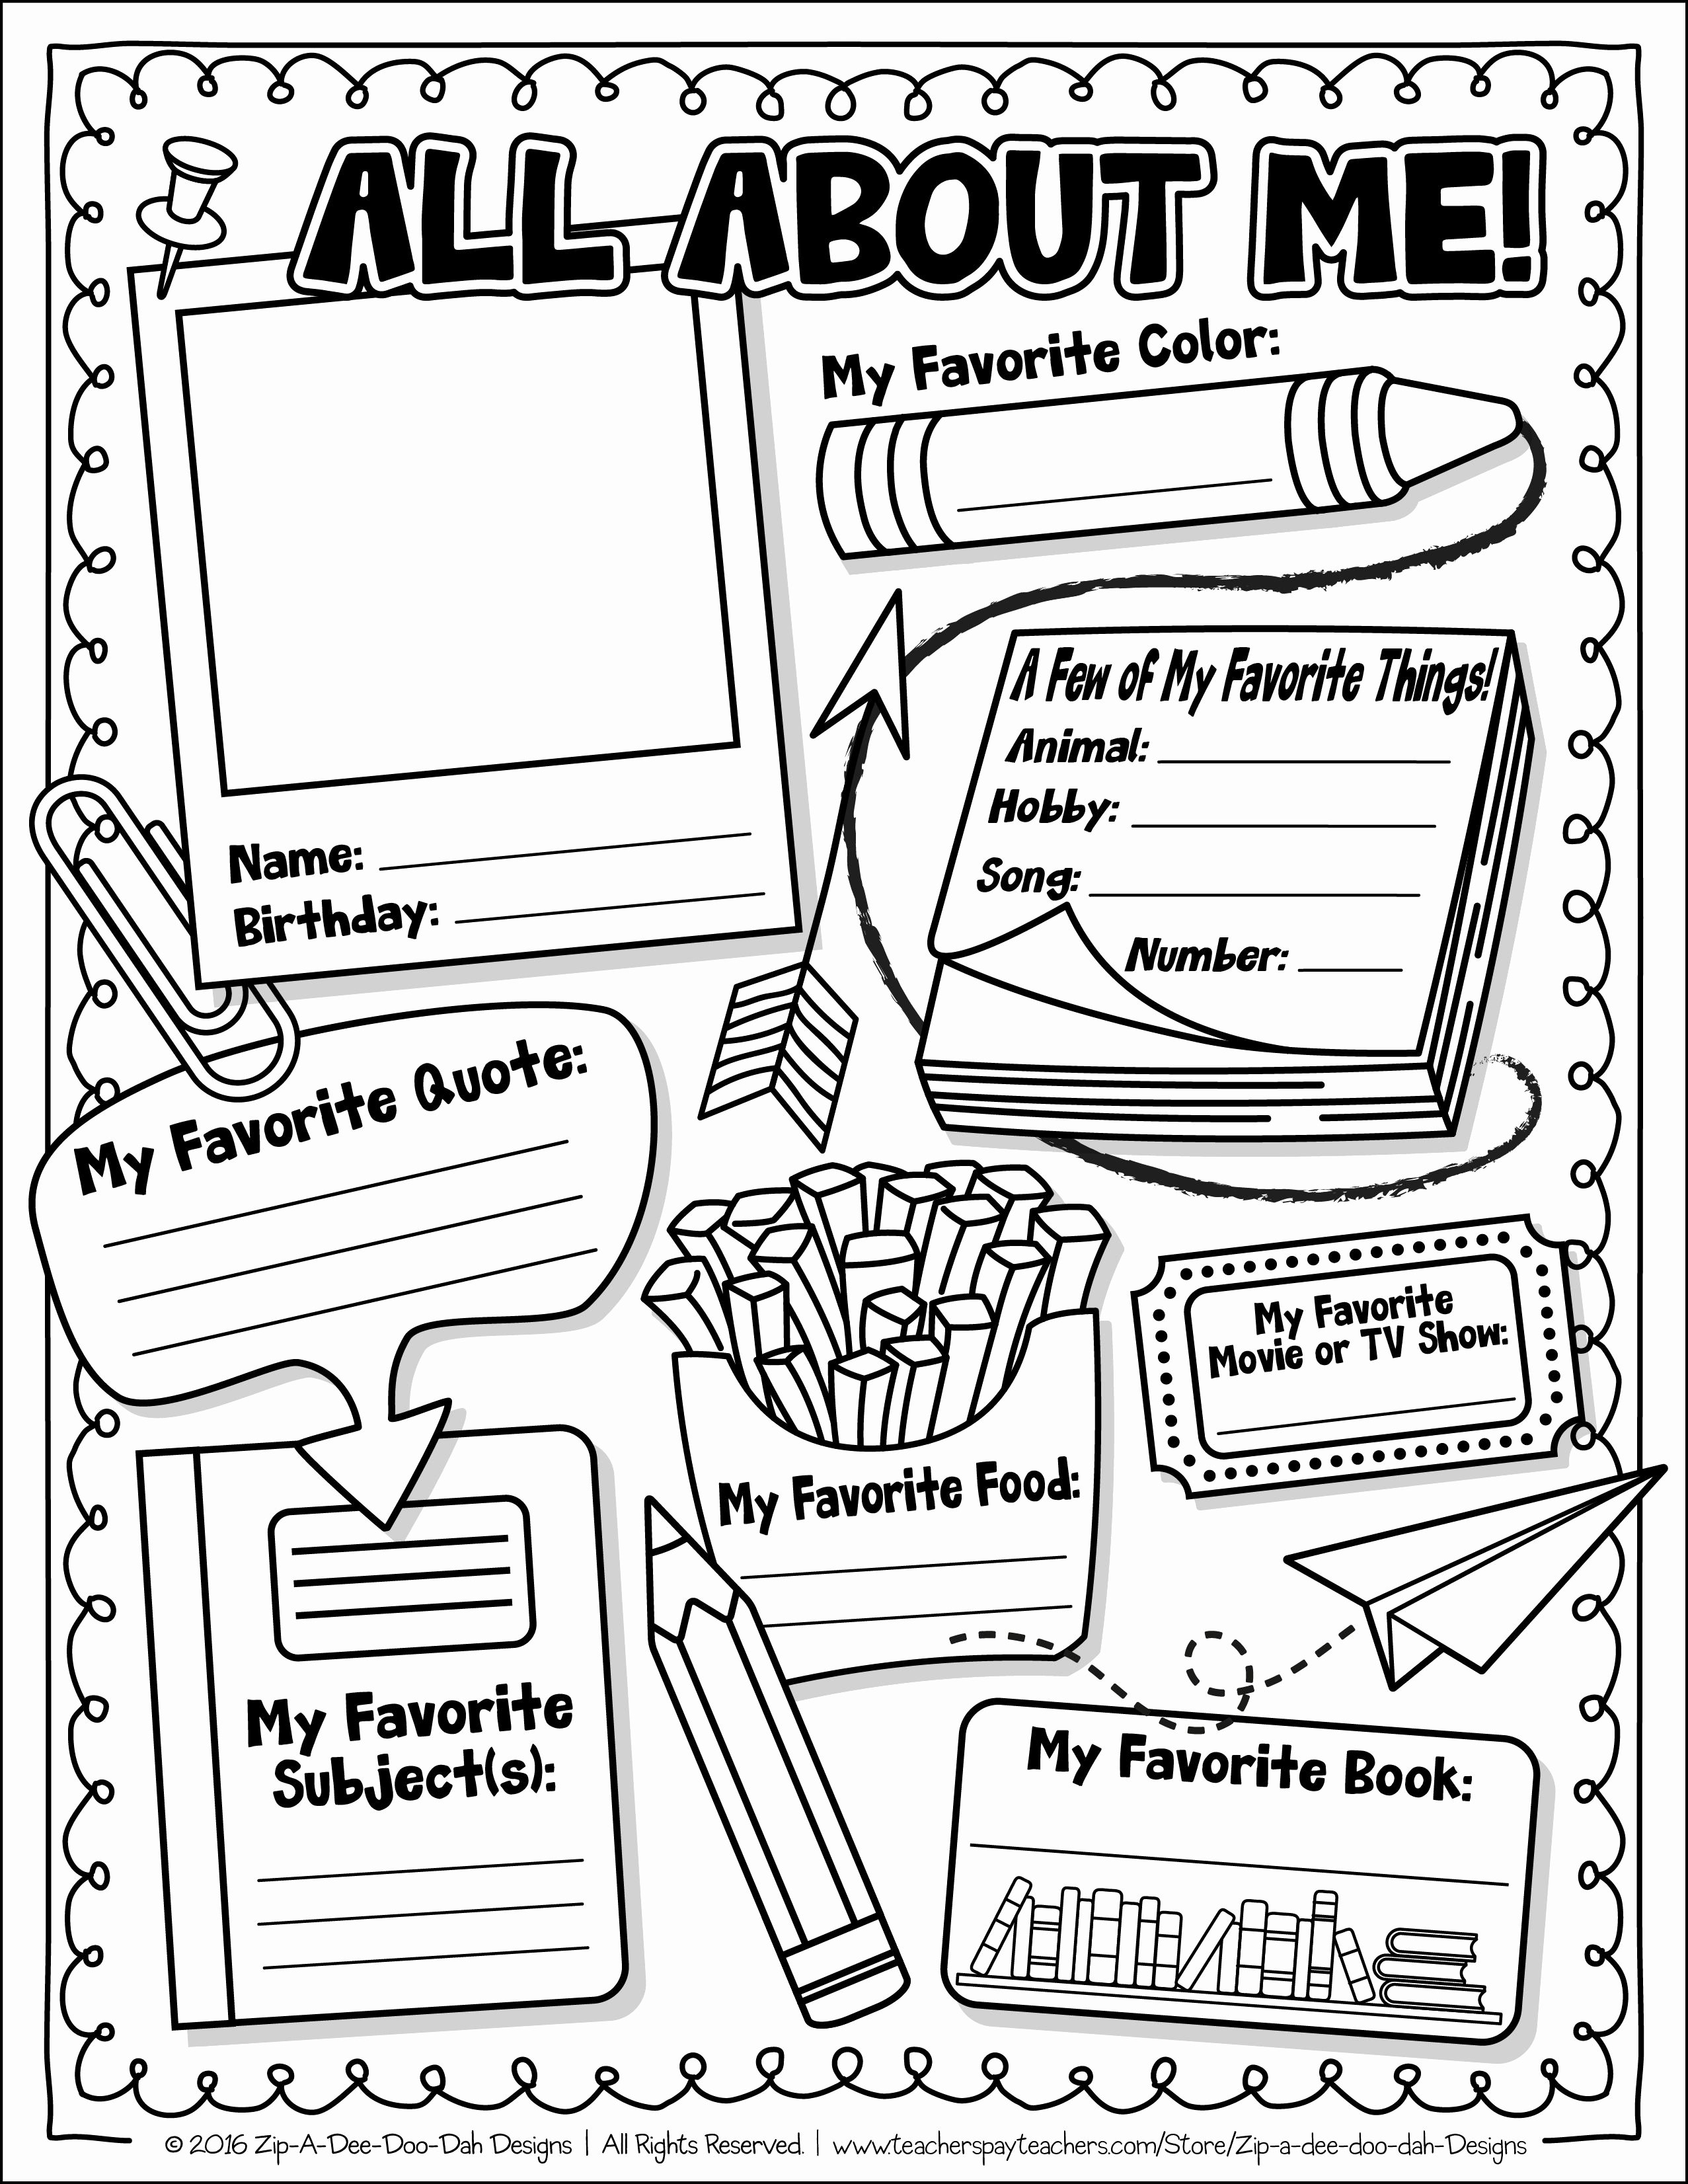 All About Me Worksheet Pdf Inspirational Pin On Teacher Crap